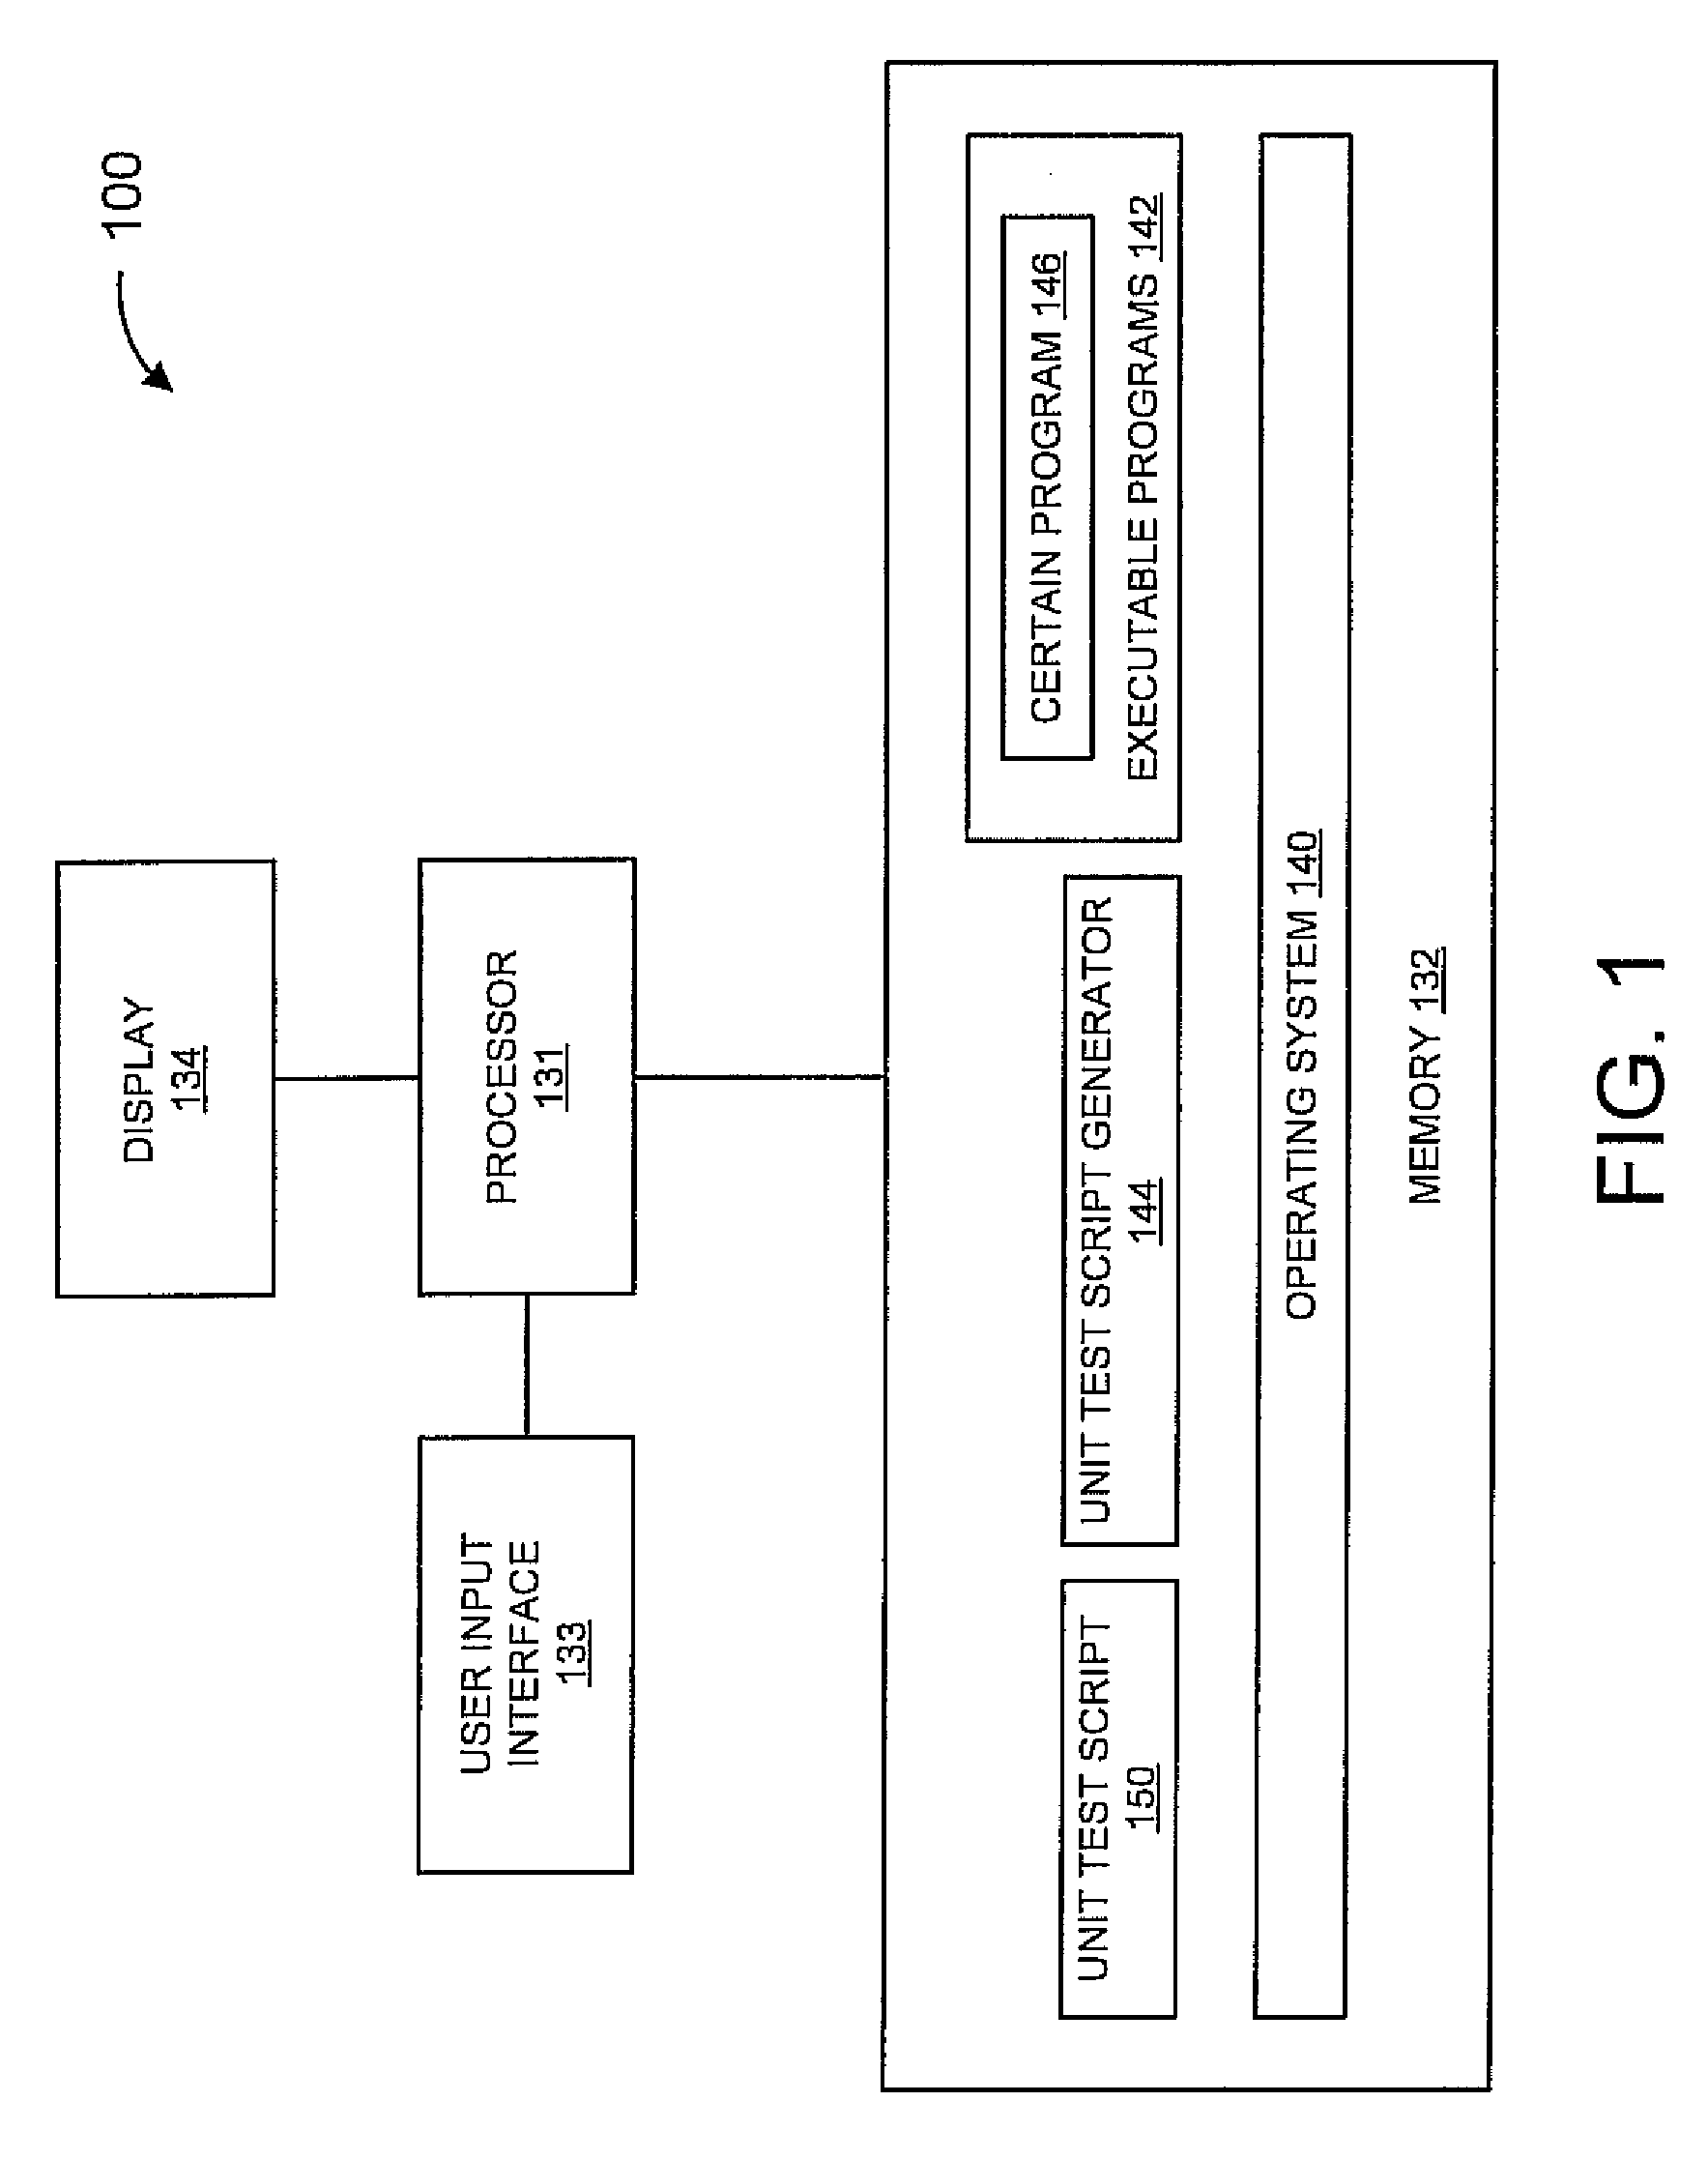 Method, system, and computer program product for generating unit testing scripts